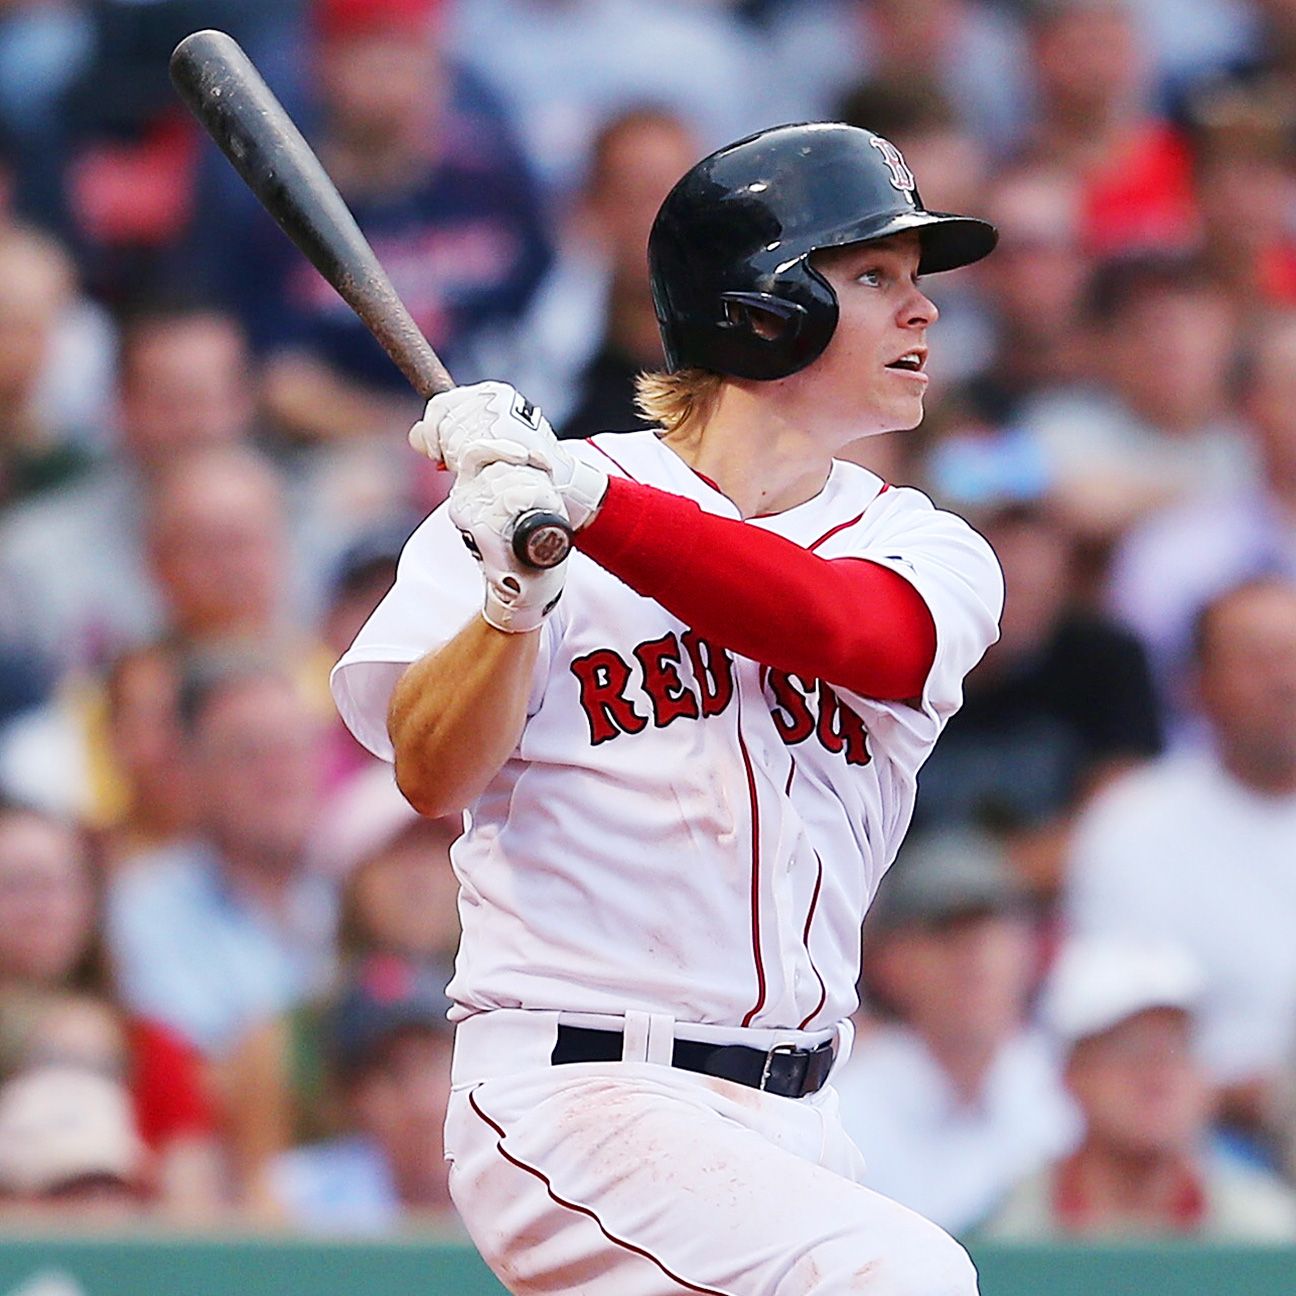 Brock Holt's cycle, feat as rare as nohitter, makes Fenway history